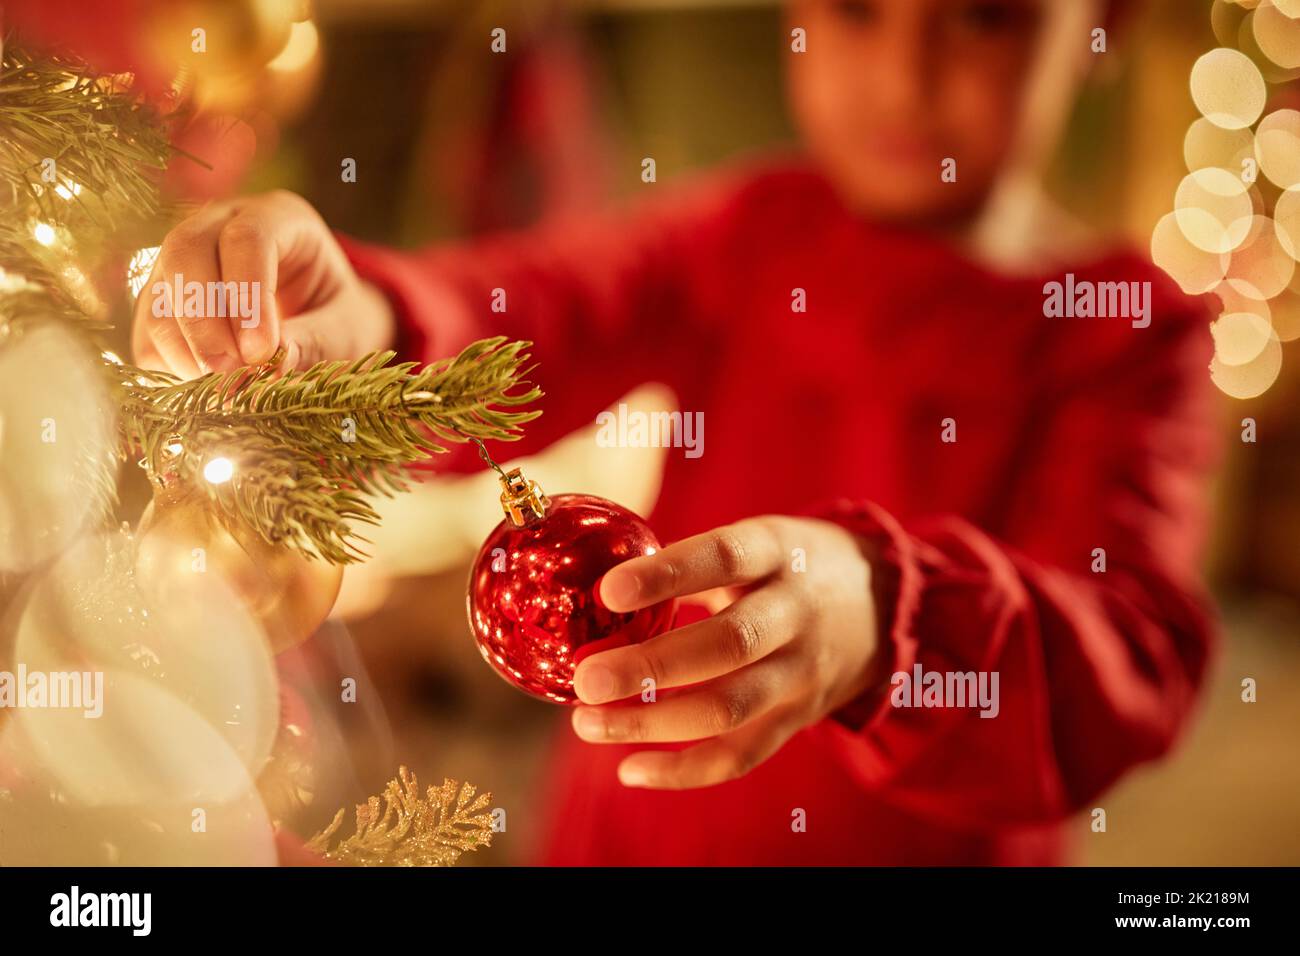 Close up of little girl hanging ornaments on Christmas tree with twinkling lights, copy space Stock Photo